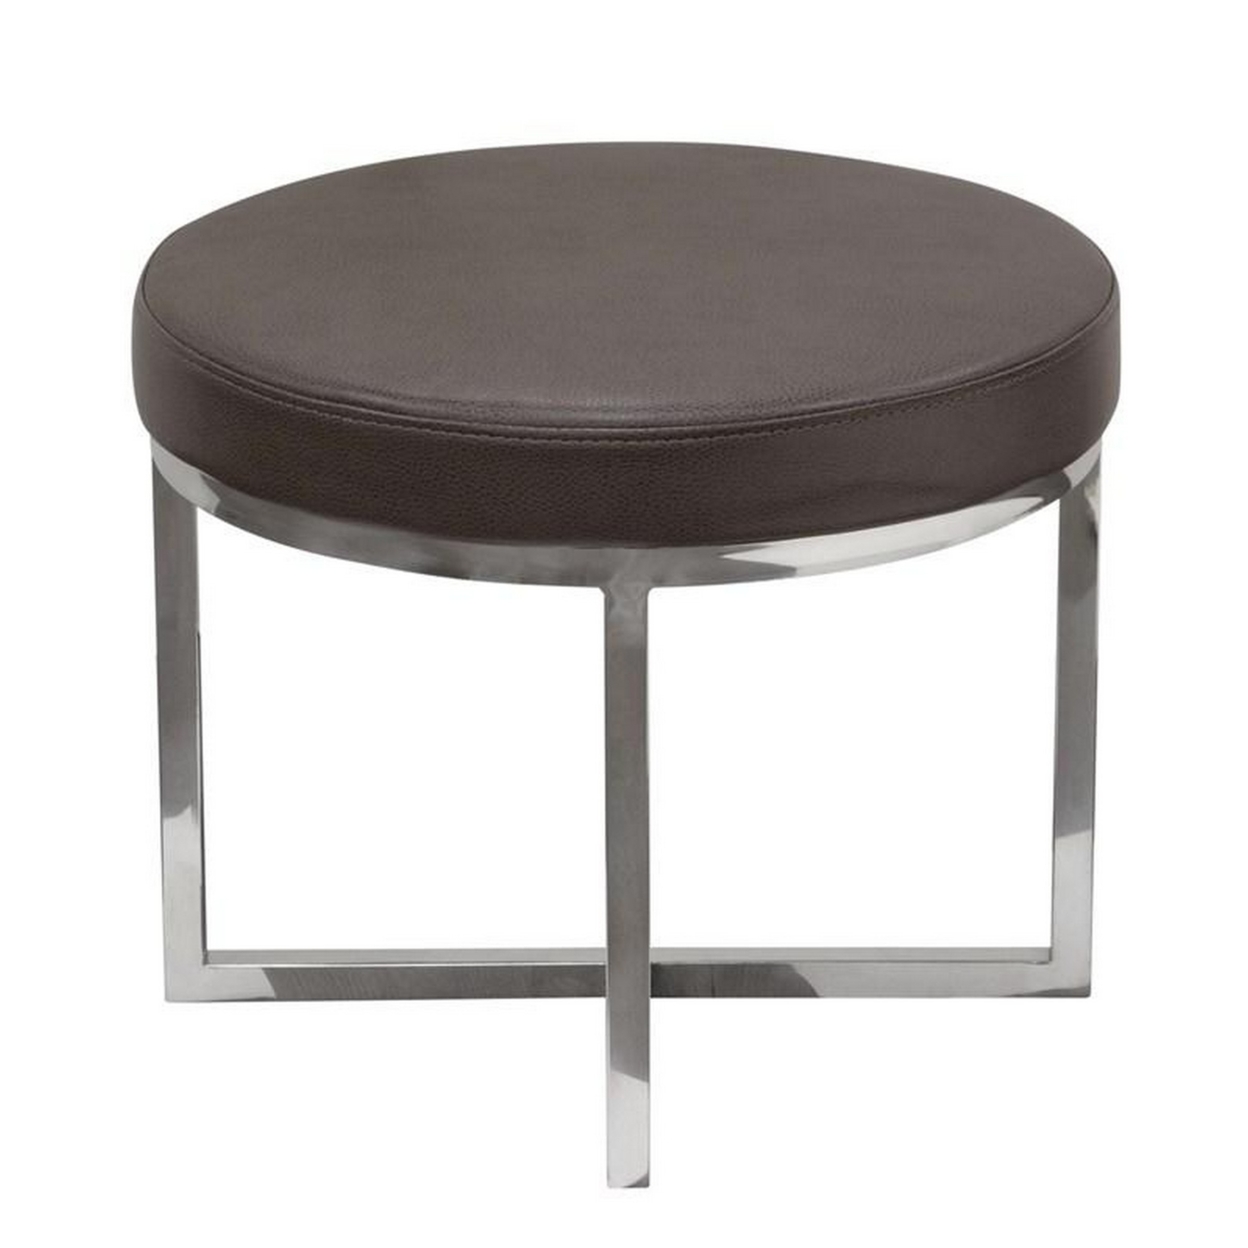 Leather Upholstered Round Accent Stool With Cross Metal Legs, Gray And Chrome- Saltoro Sherpi